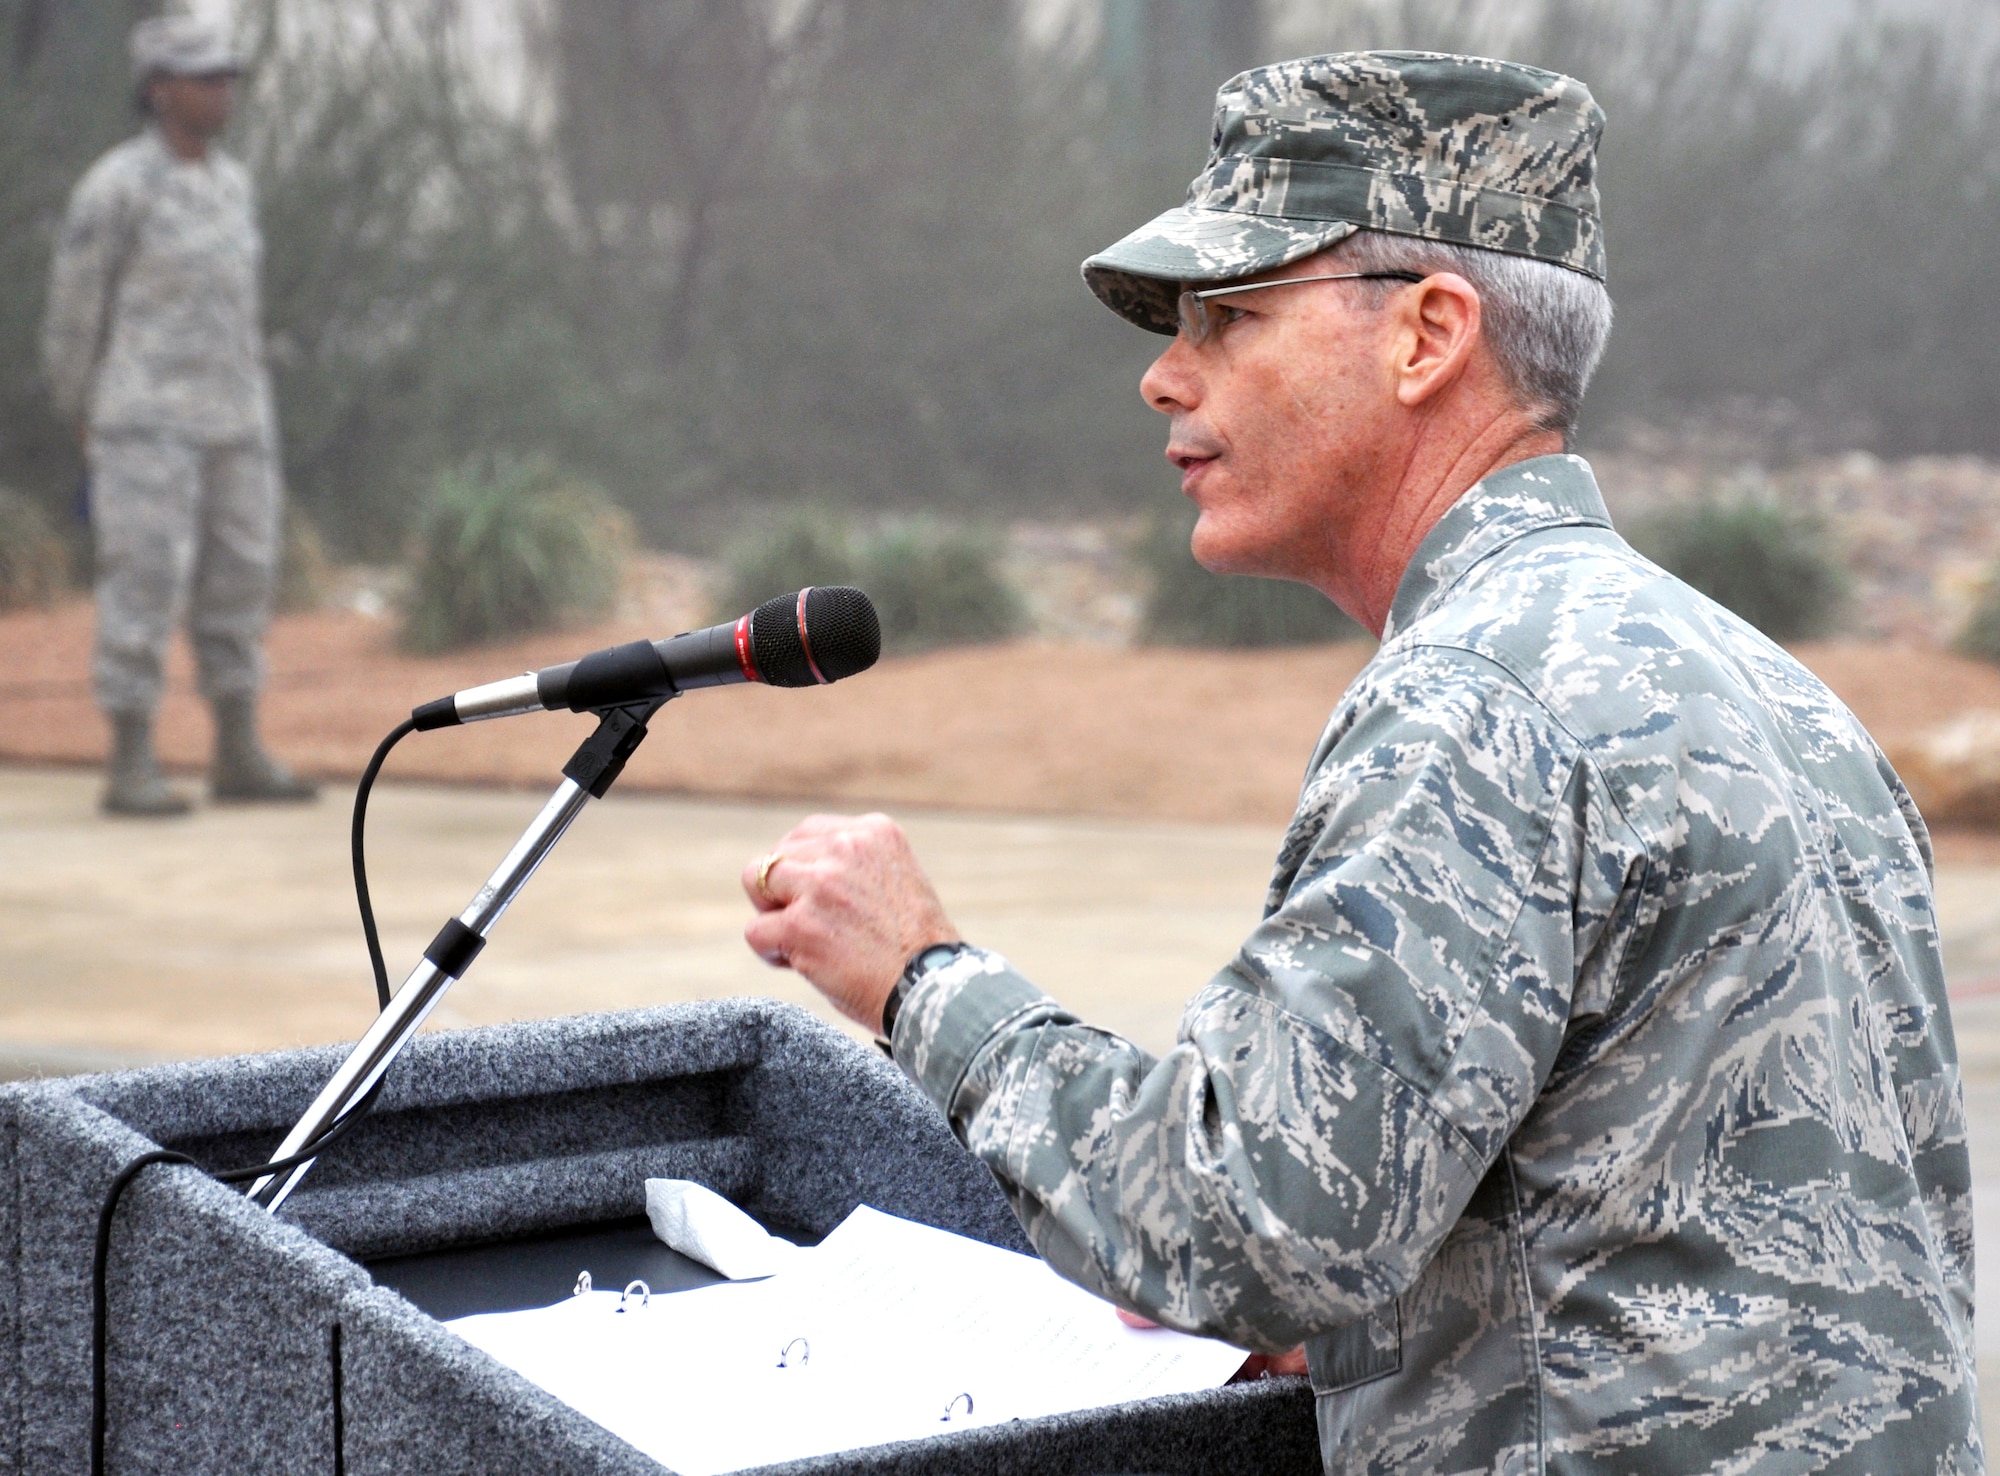 Brig. Gen. Bob LaBrutta, Joint Base San Antonio and 502nd Air Base Wing commander, makes a point during his comments at the 502nd Air Base Wing transformation ceremony at Joint Base San Antonio-Fort Sam Houston Dec. 4. “Hundreds of people put in countless hours of effort in analyzing and developing this restructure and coordinating it with our mission partners, higher headquarters and air staff,” LaBrutta said. (U.S. Air Force photo by Steve Elliott)